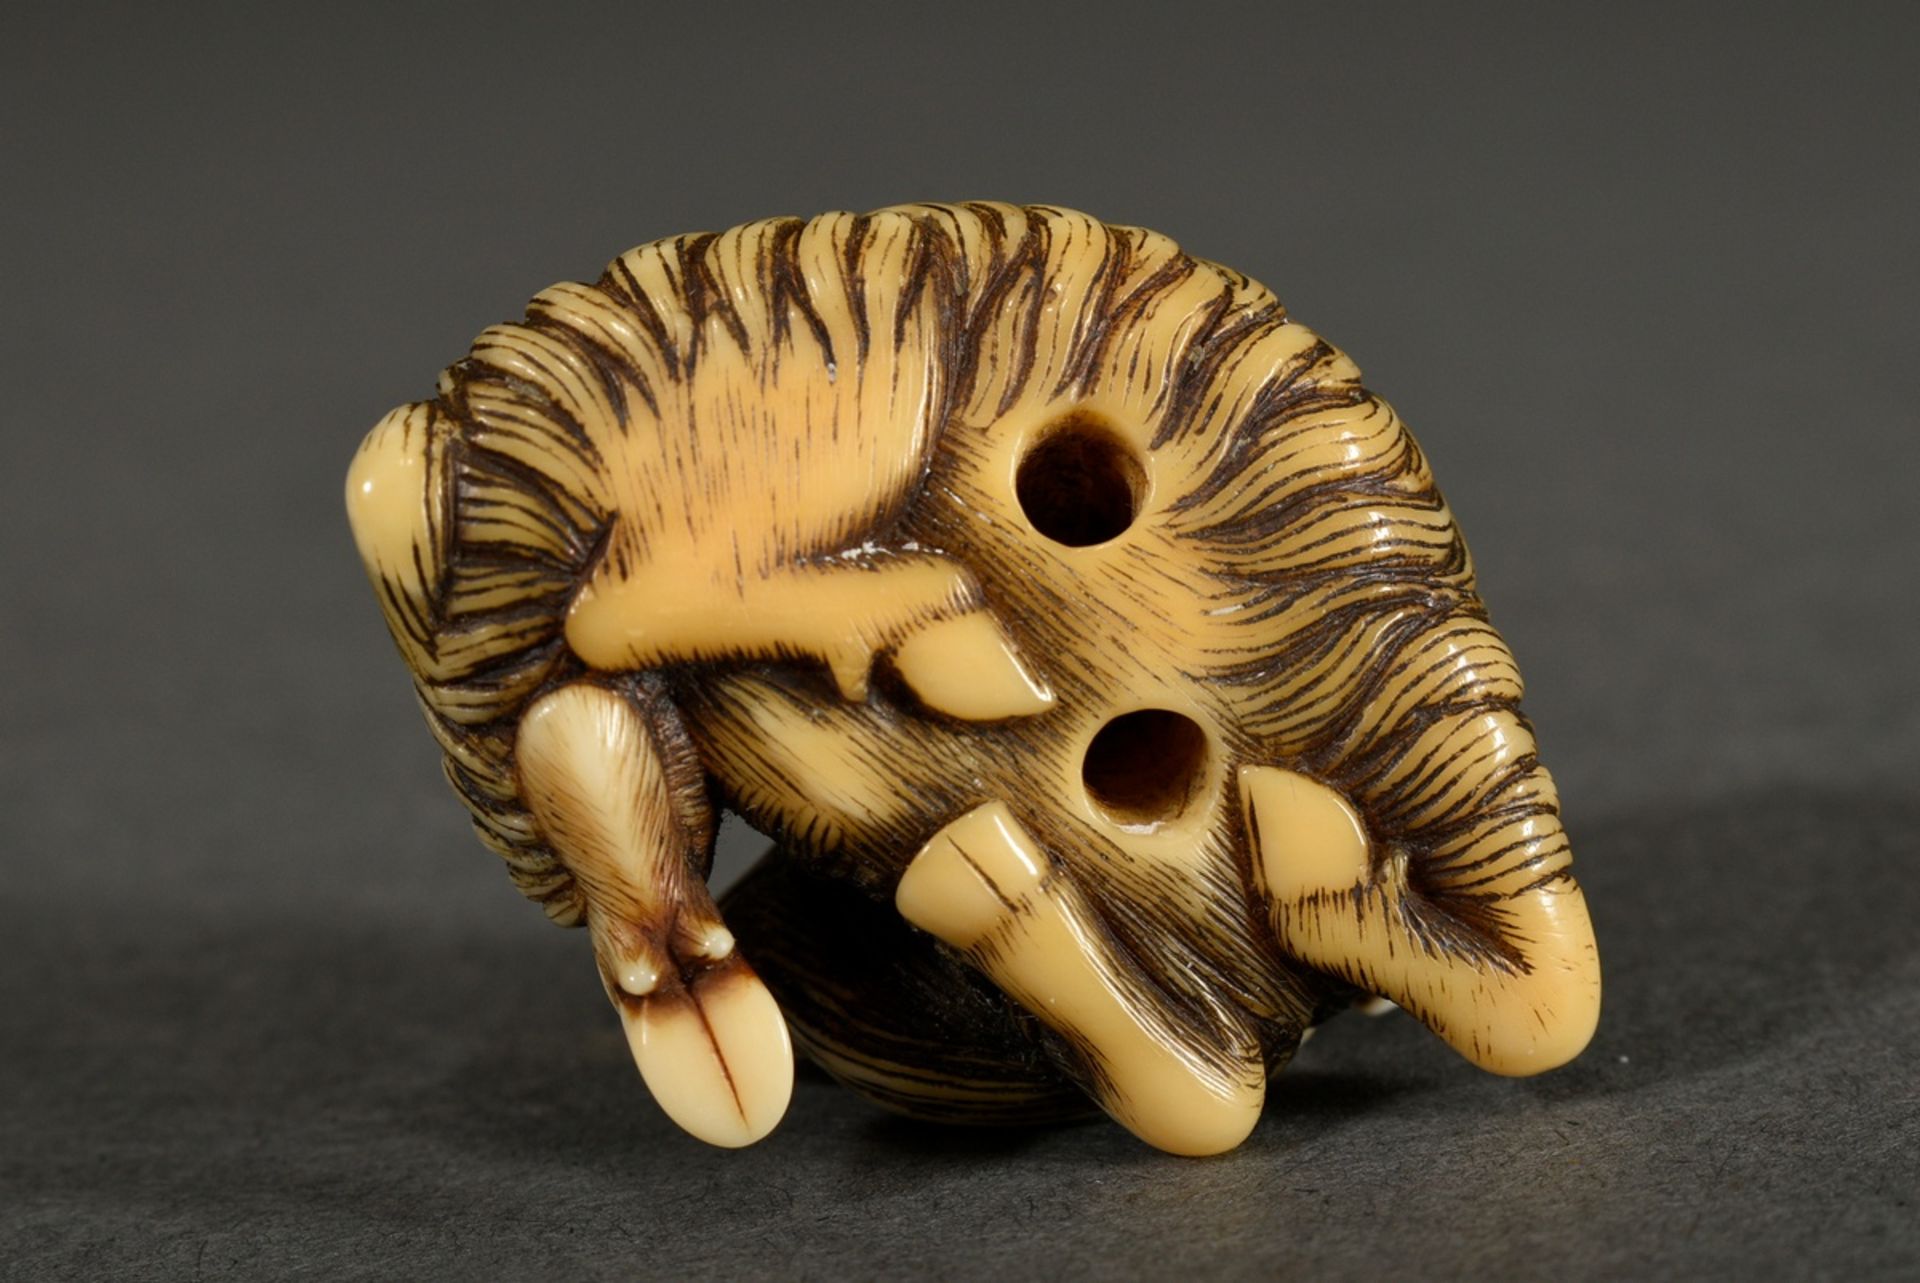 Ivory netsuke "Rolled-in mountain goat" with inlaid eyes of black horn and engraved fur, golden pat - Image 5 of 6